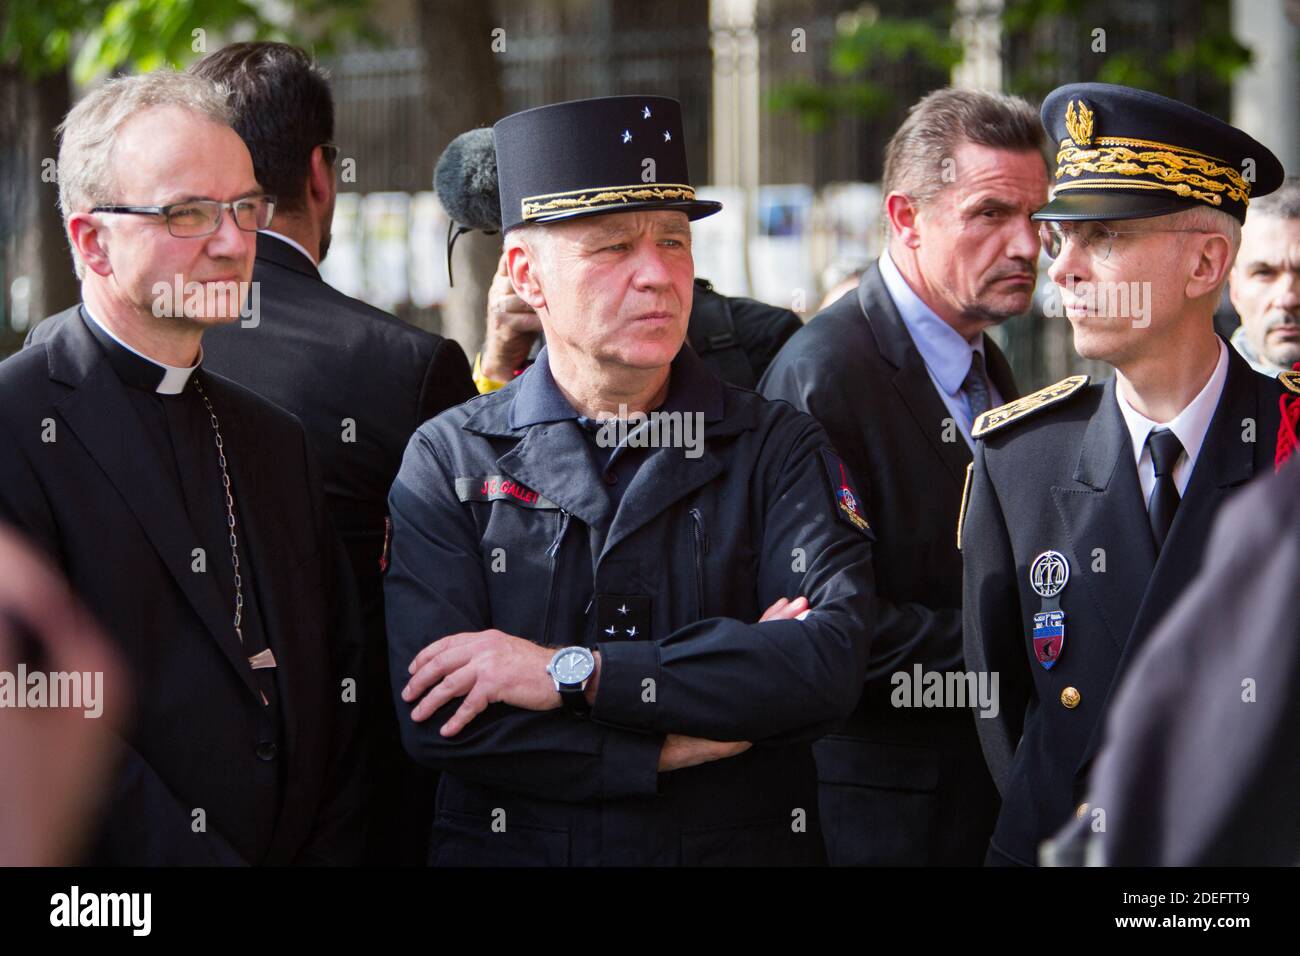 Jean-Claude Gallet General of the fire fighters of paris, next to Didier Lallement. Jean-Marc Chauve, French Interior Minister Christophe Castaner, Paris prefect Didier Lallement, Paris mayor Anne Hidalgo, and other officials walk by Notre Dame cathedral on April 18, 2019 in Paris. France paid a daylong tribute on April 18, 2019 to the Paris firefighters who saved Notre Dame Cathedral from collapse, while construction workers rushed to secure an area above one of the church's famed rose-shaped windows and other vulnerable sections of the fire-damaged landmark. Photo by Raphael Lafargue/ABACAPR Stock Photo